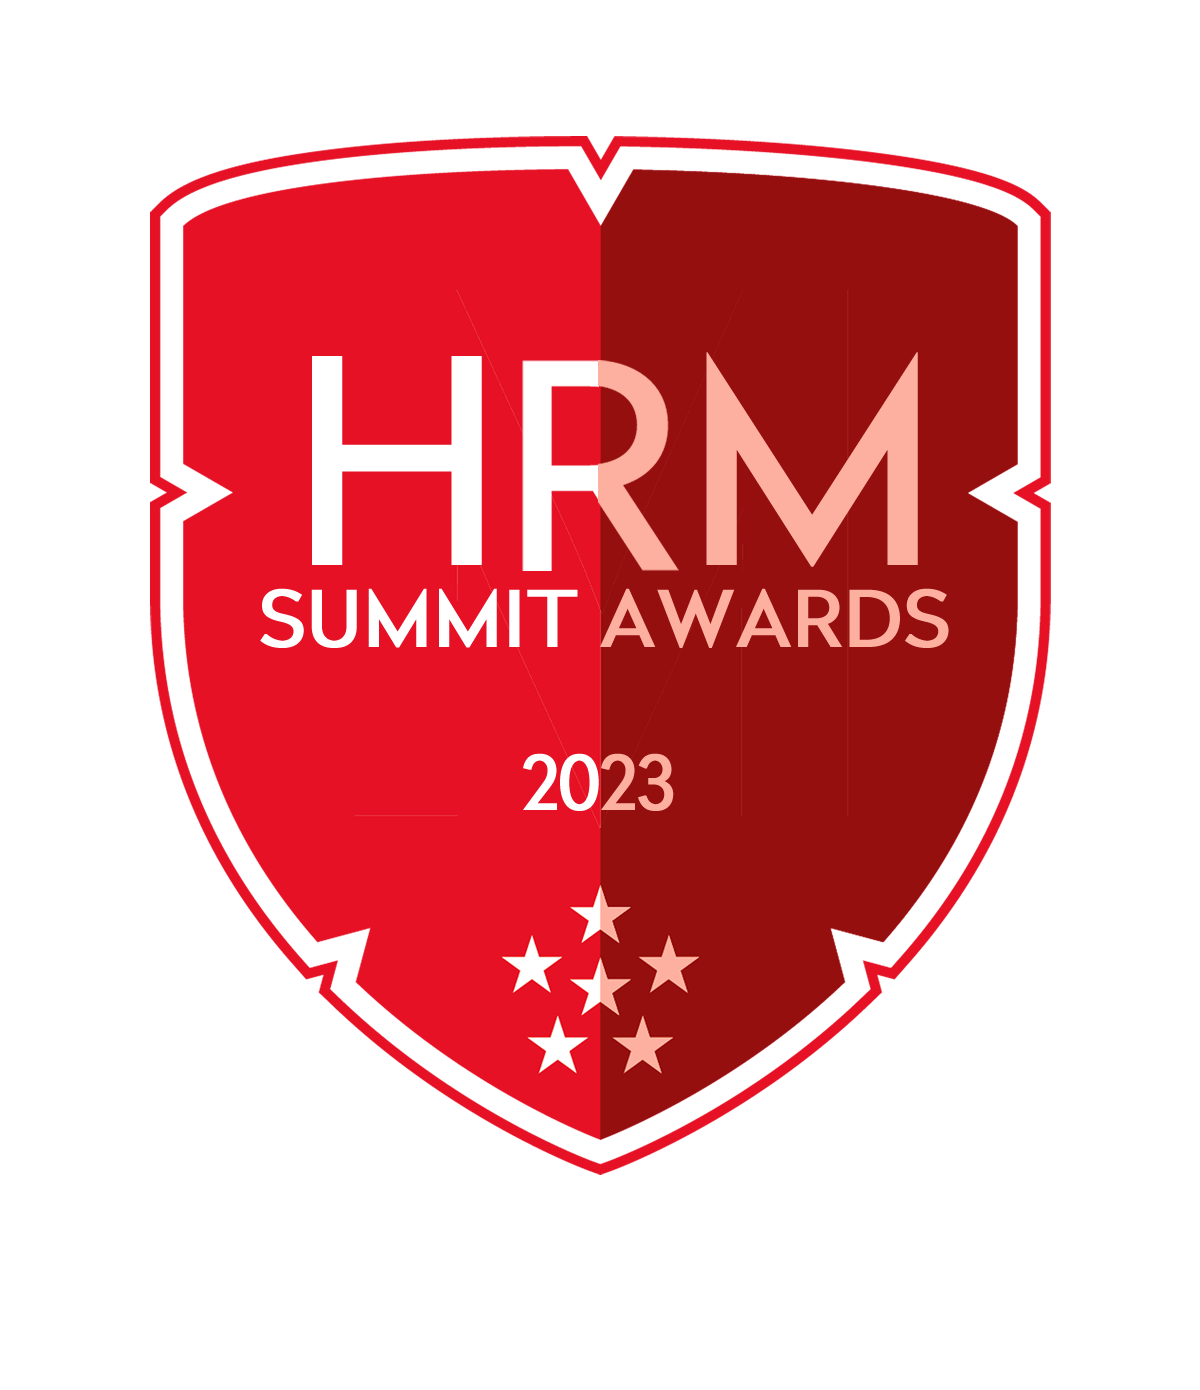 The HRM Summit Awards is the region’s foremost, credible HR awards